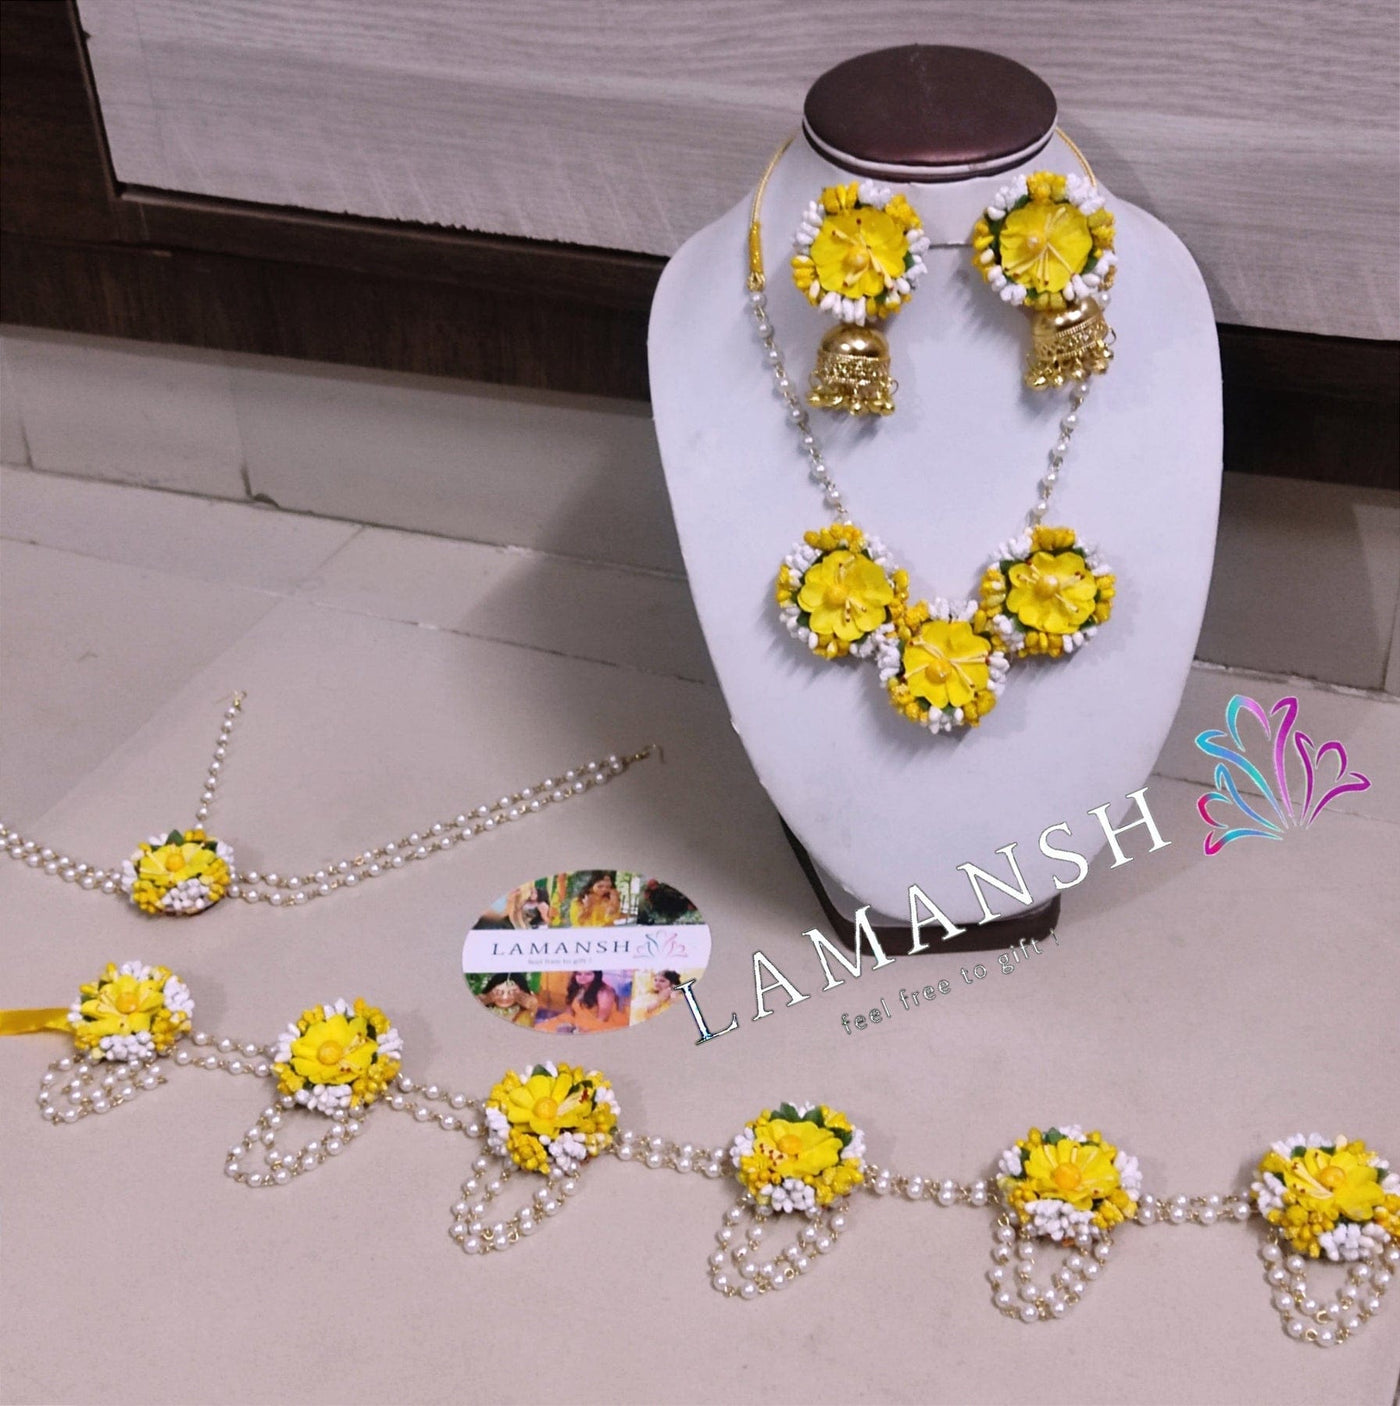 Lamansh Baby 👶shower 1 Necklace, 2 jhumki Earrings  , 1 Maangtika with side chain , 1 Kamarband & 2 Bracelets attached to Ring / Yellow White LAMANSH® Floral 🌺 Jewellery Set with Kamarbandh for Haldi / Flower Set for Baby Shower & Godbharai 🤰